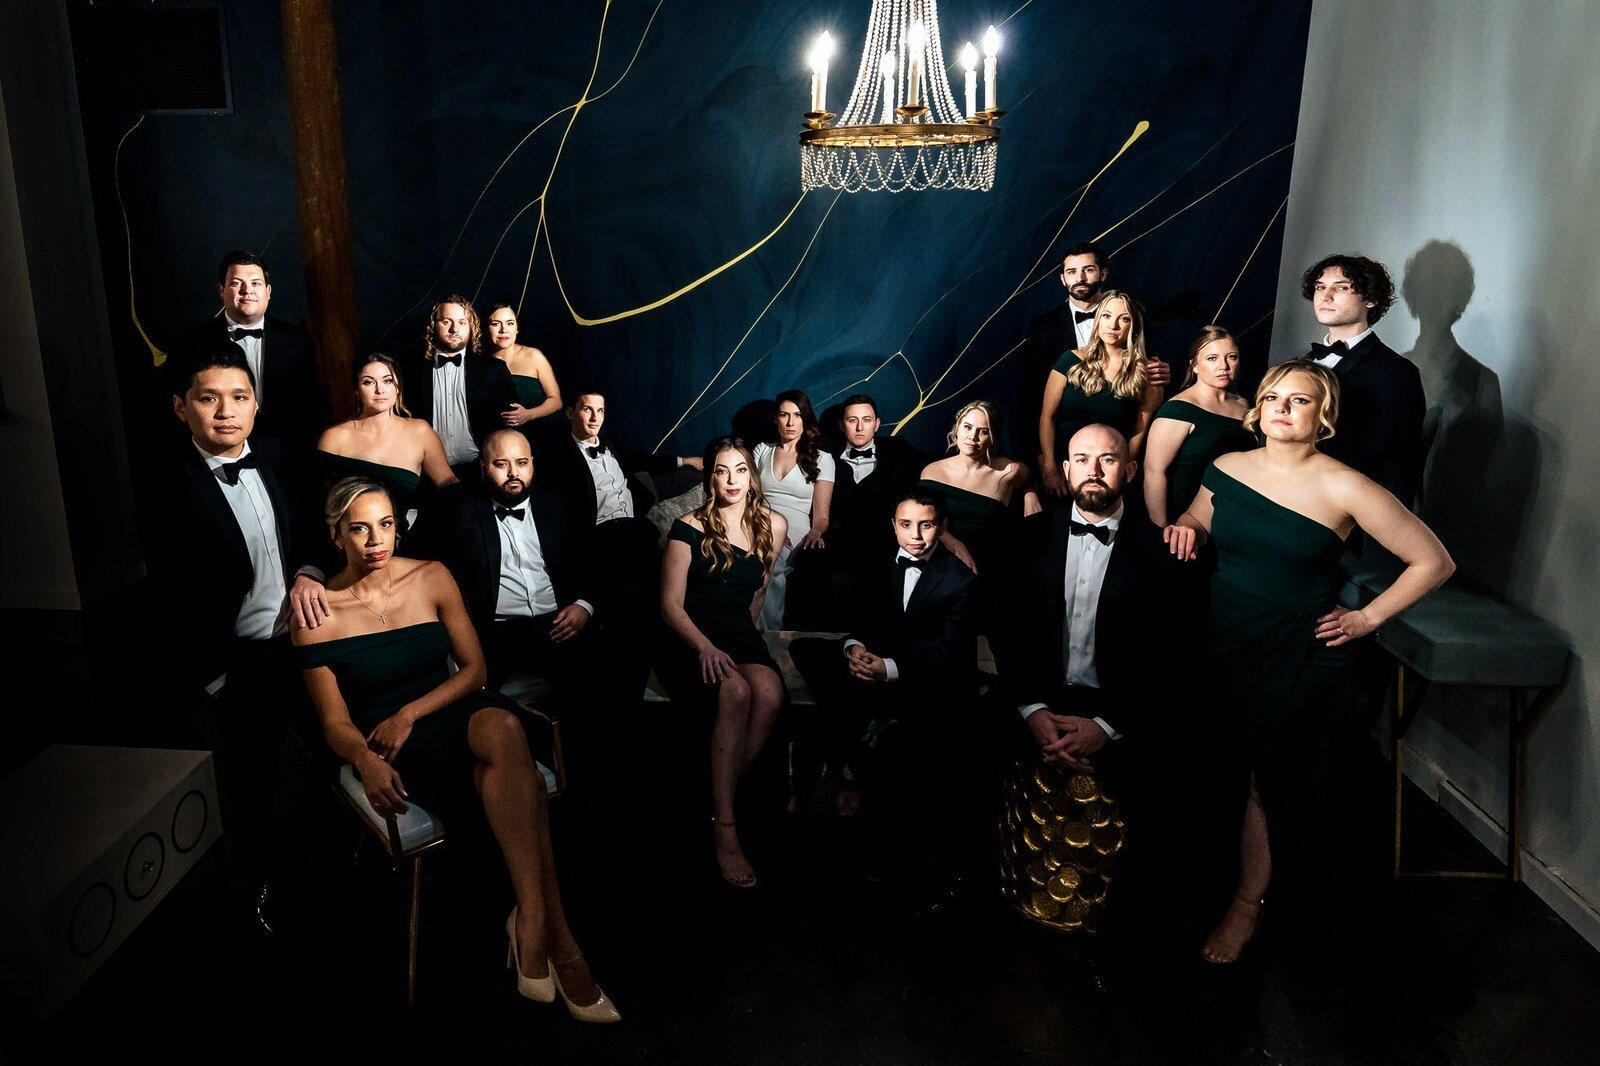 Dramatically lit group portrait of a wedding party in tuxedos and dark green dresses